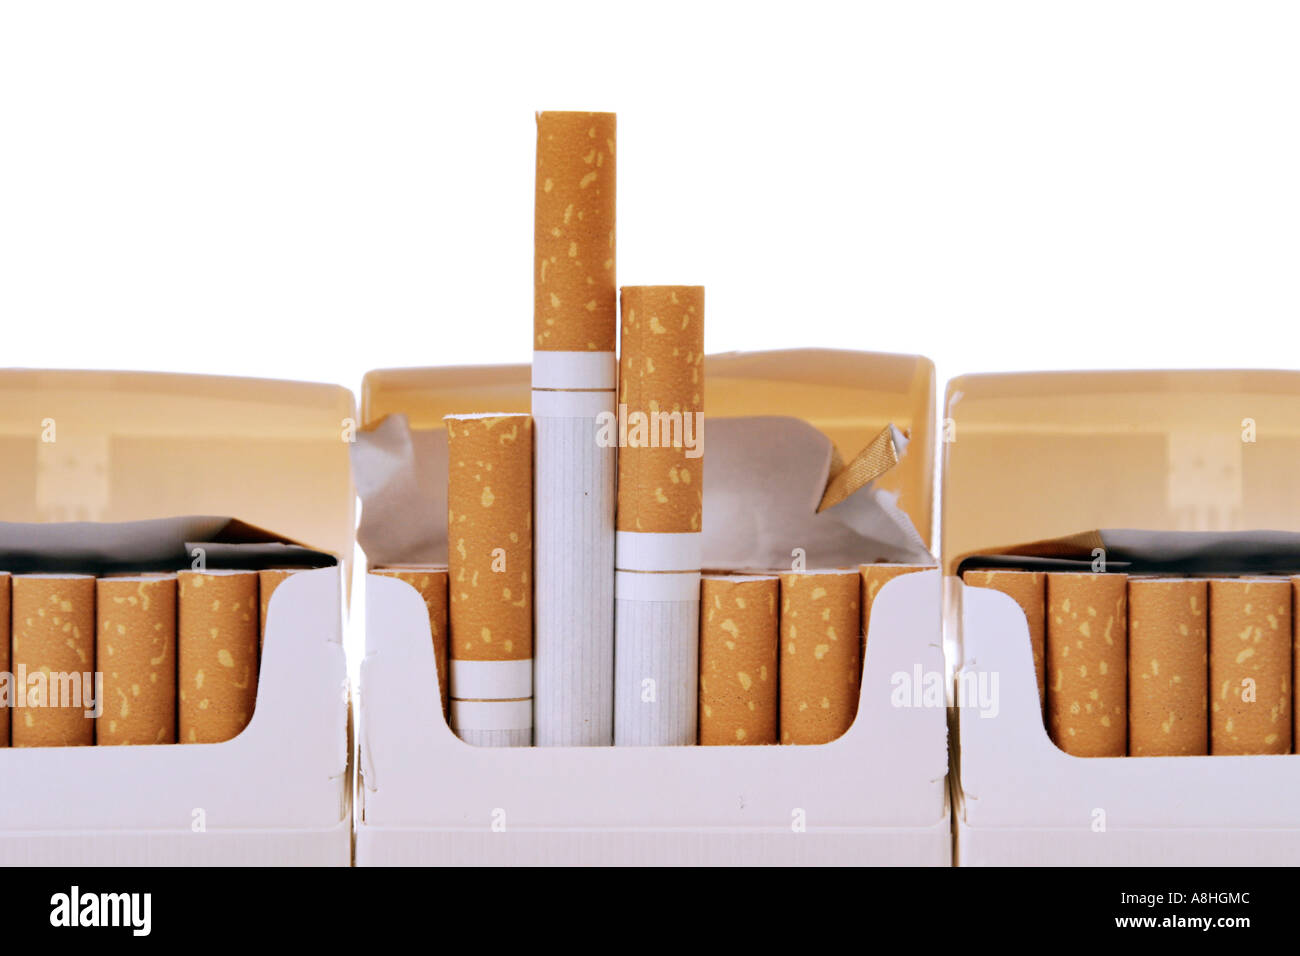 Cigarette packet Stock Photo